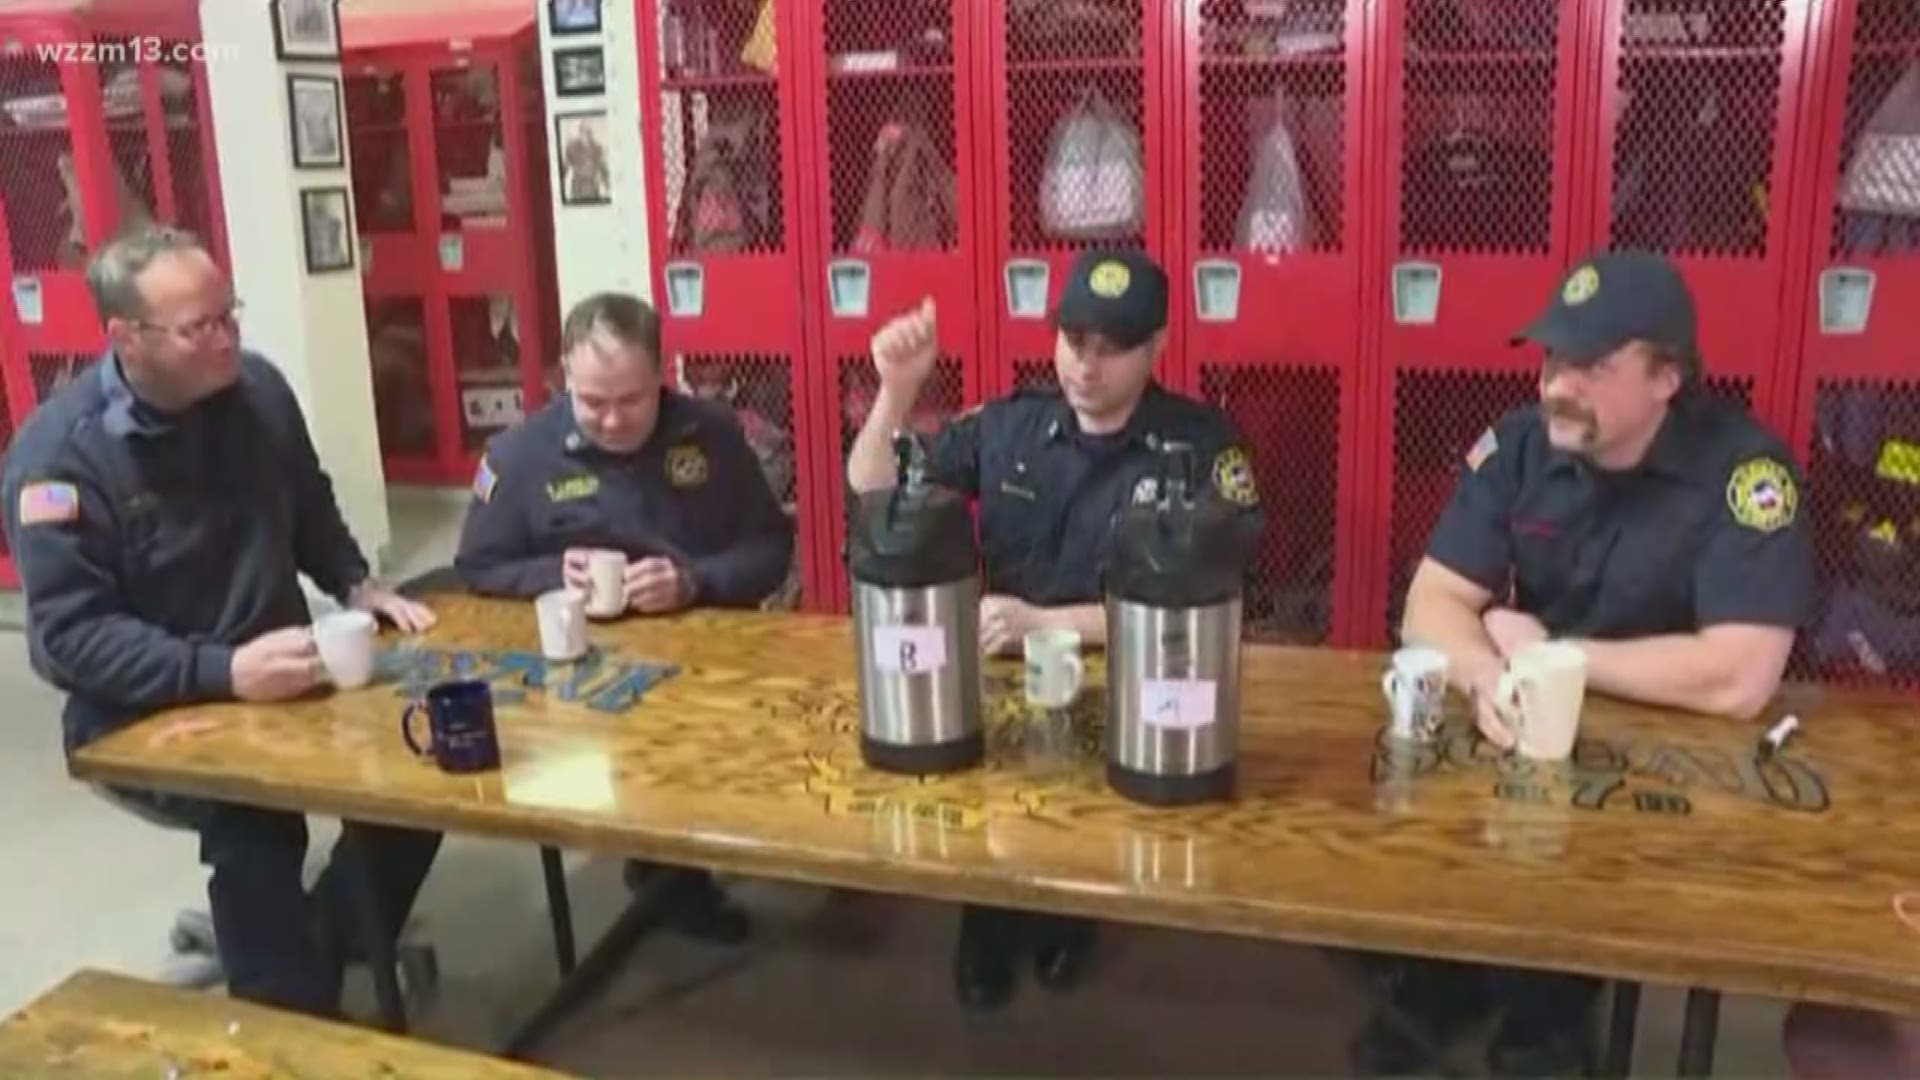 To say thank you for their dedication to the community, 13 ON YOUR SIDE shared coffee with first responders at LaGrave Avenue Fire Station in Grand Rapids for National Good Samaritan Day.